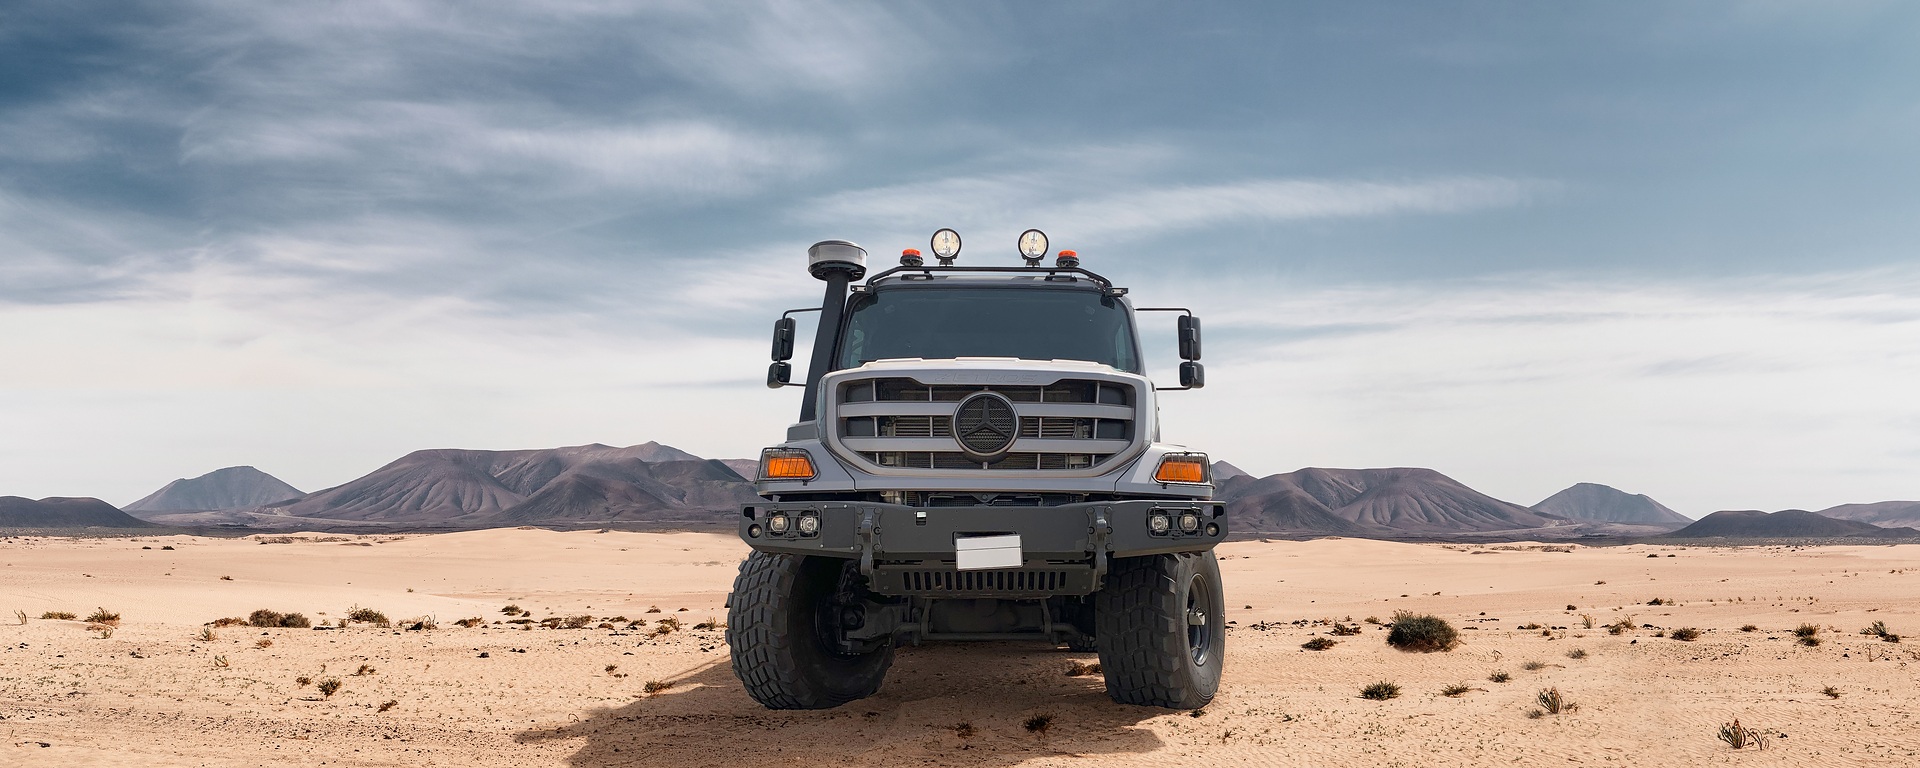 Built for logistical and tactical challenges: Mercedes-Benz Special Trucks will be showcasing tailor-made military trucks for demanding operations even under extreme conditions at IDEX 2023 in Abu Dhabi